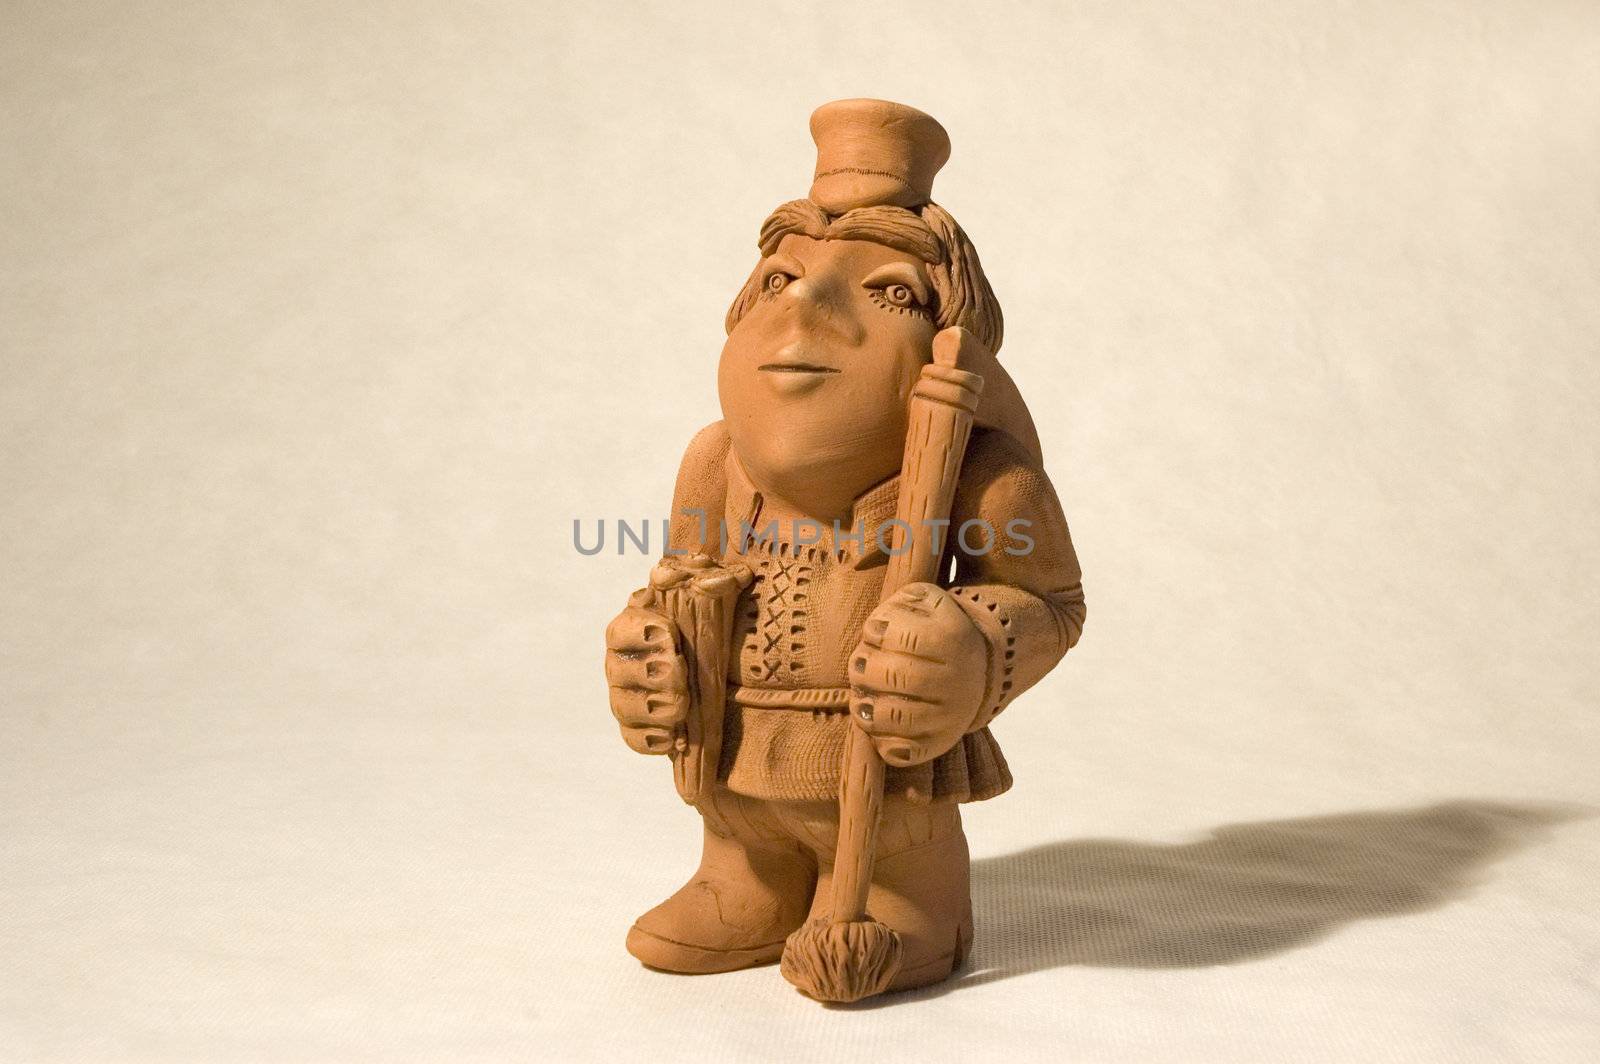 subject is the clay figurine of the peasant